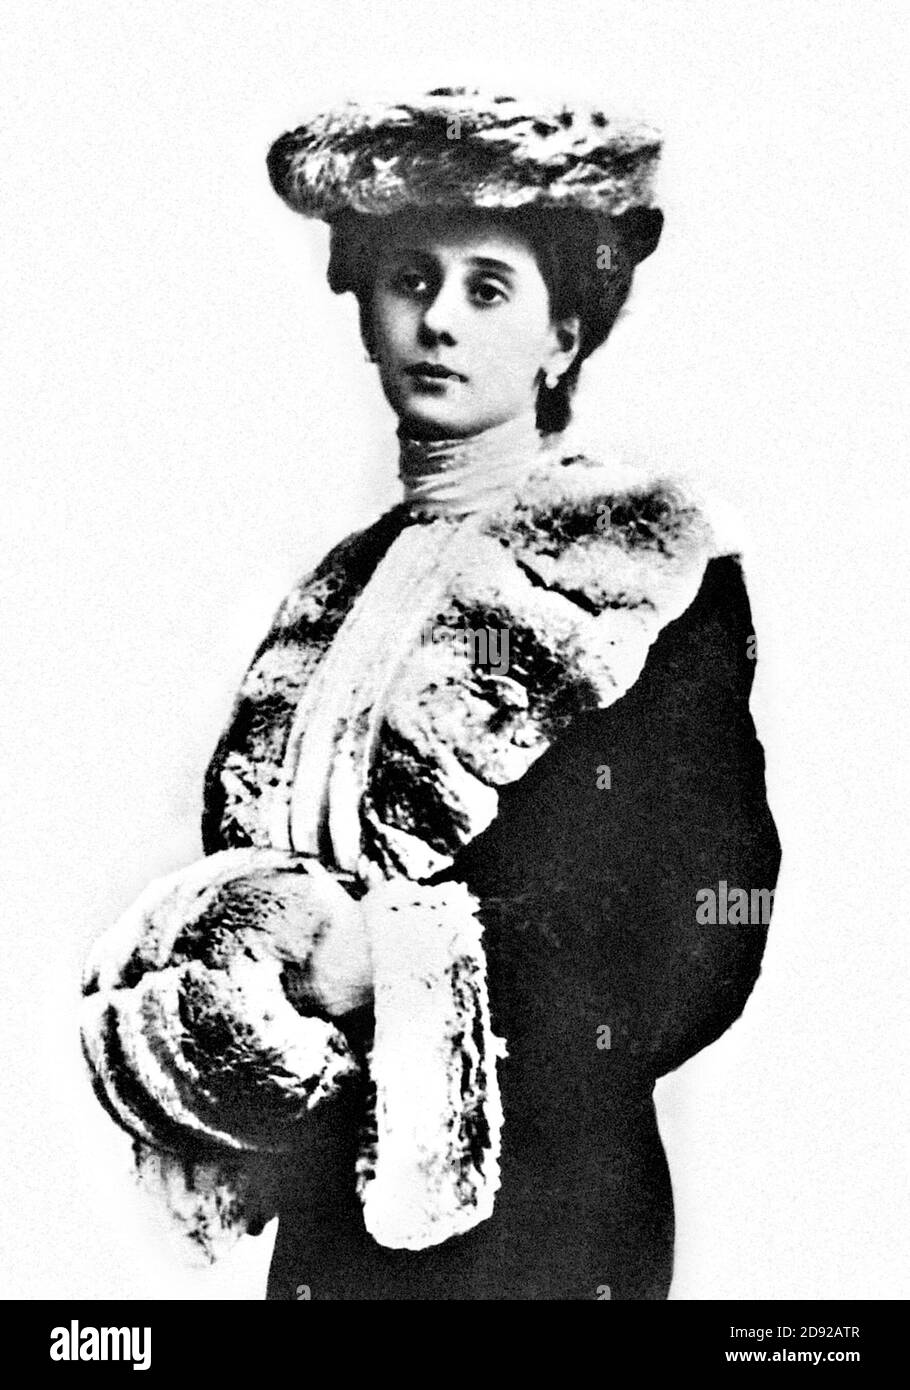 Anna Pavlova. Portrait of the Russian ballet dancer Anna Pavlovna Pavlova (born Anna Matveyevna Pavlova, 1881-1931), in the role of Giselle, c.1905 Stock Photo